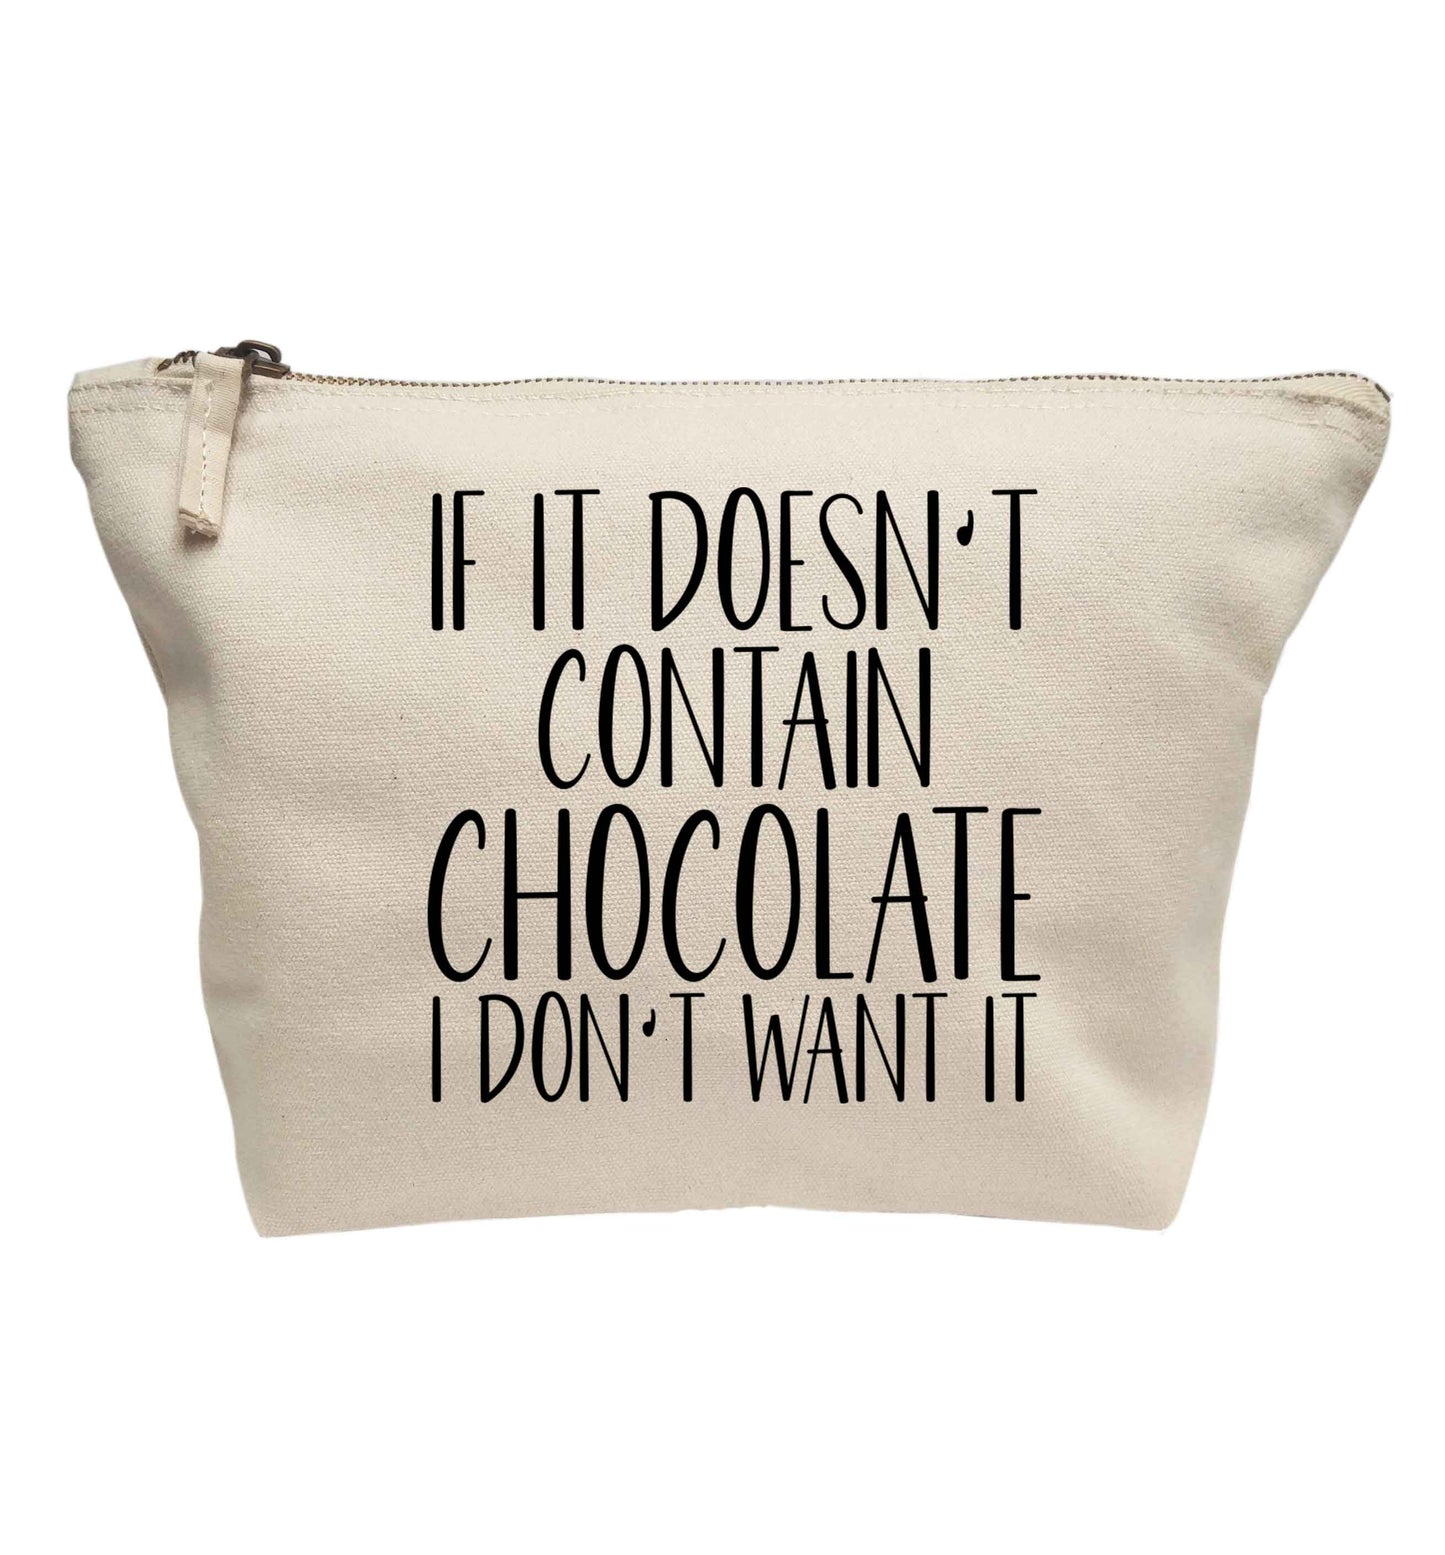 If it doesn't contain chocolate I don't want it | Makeup / wash bag